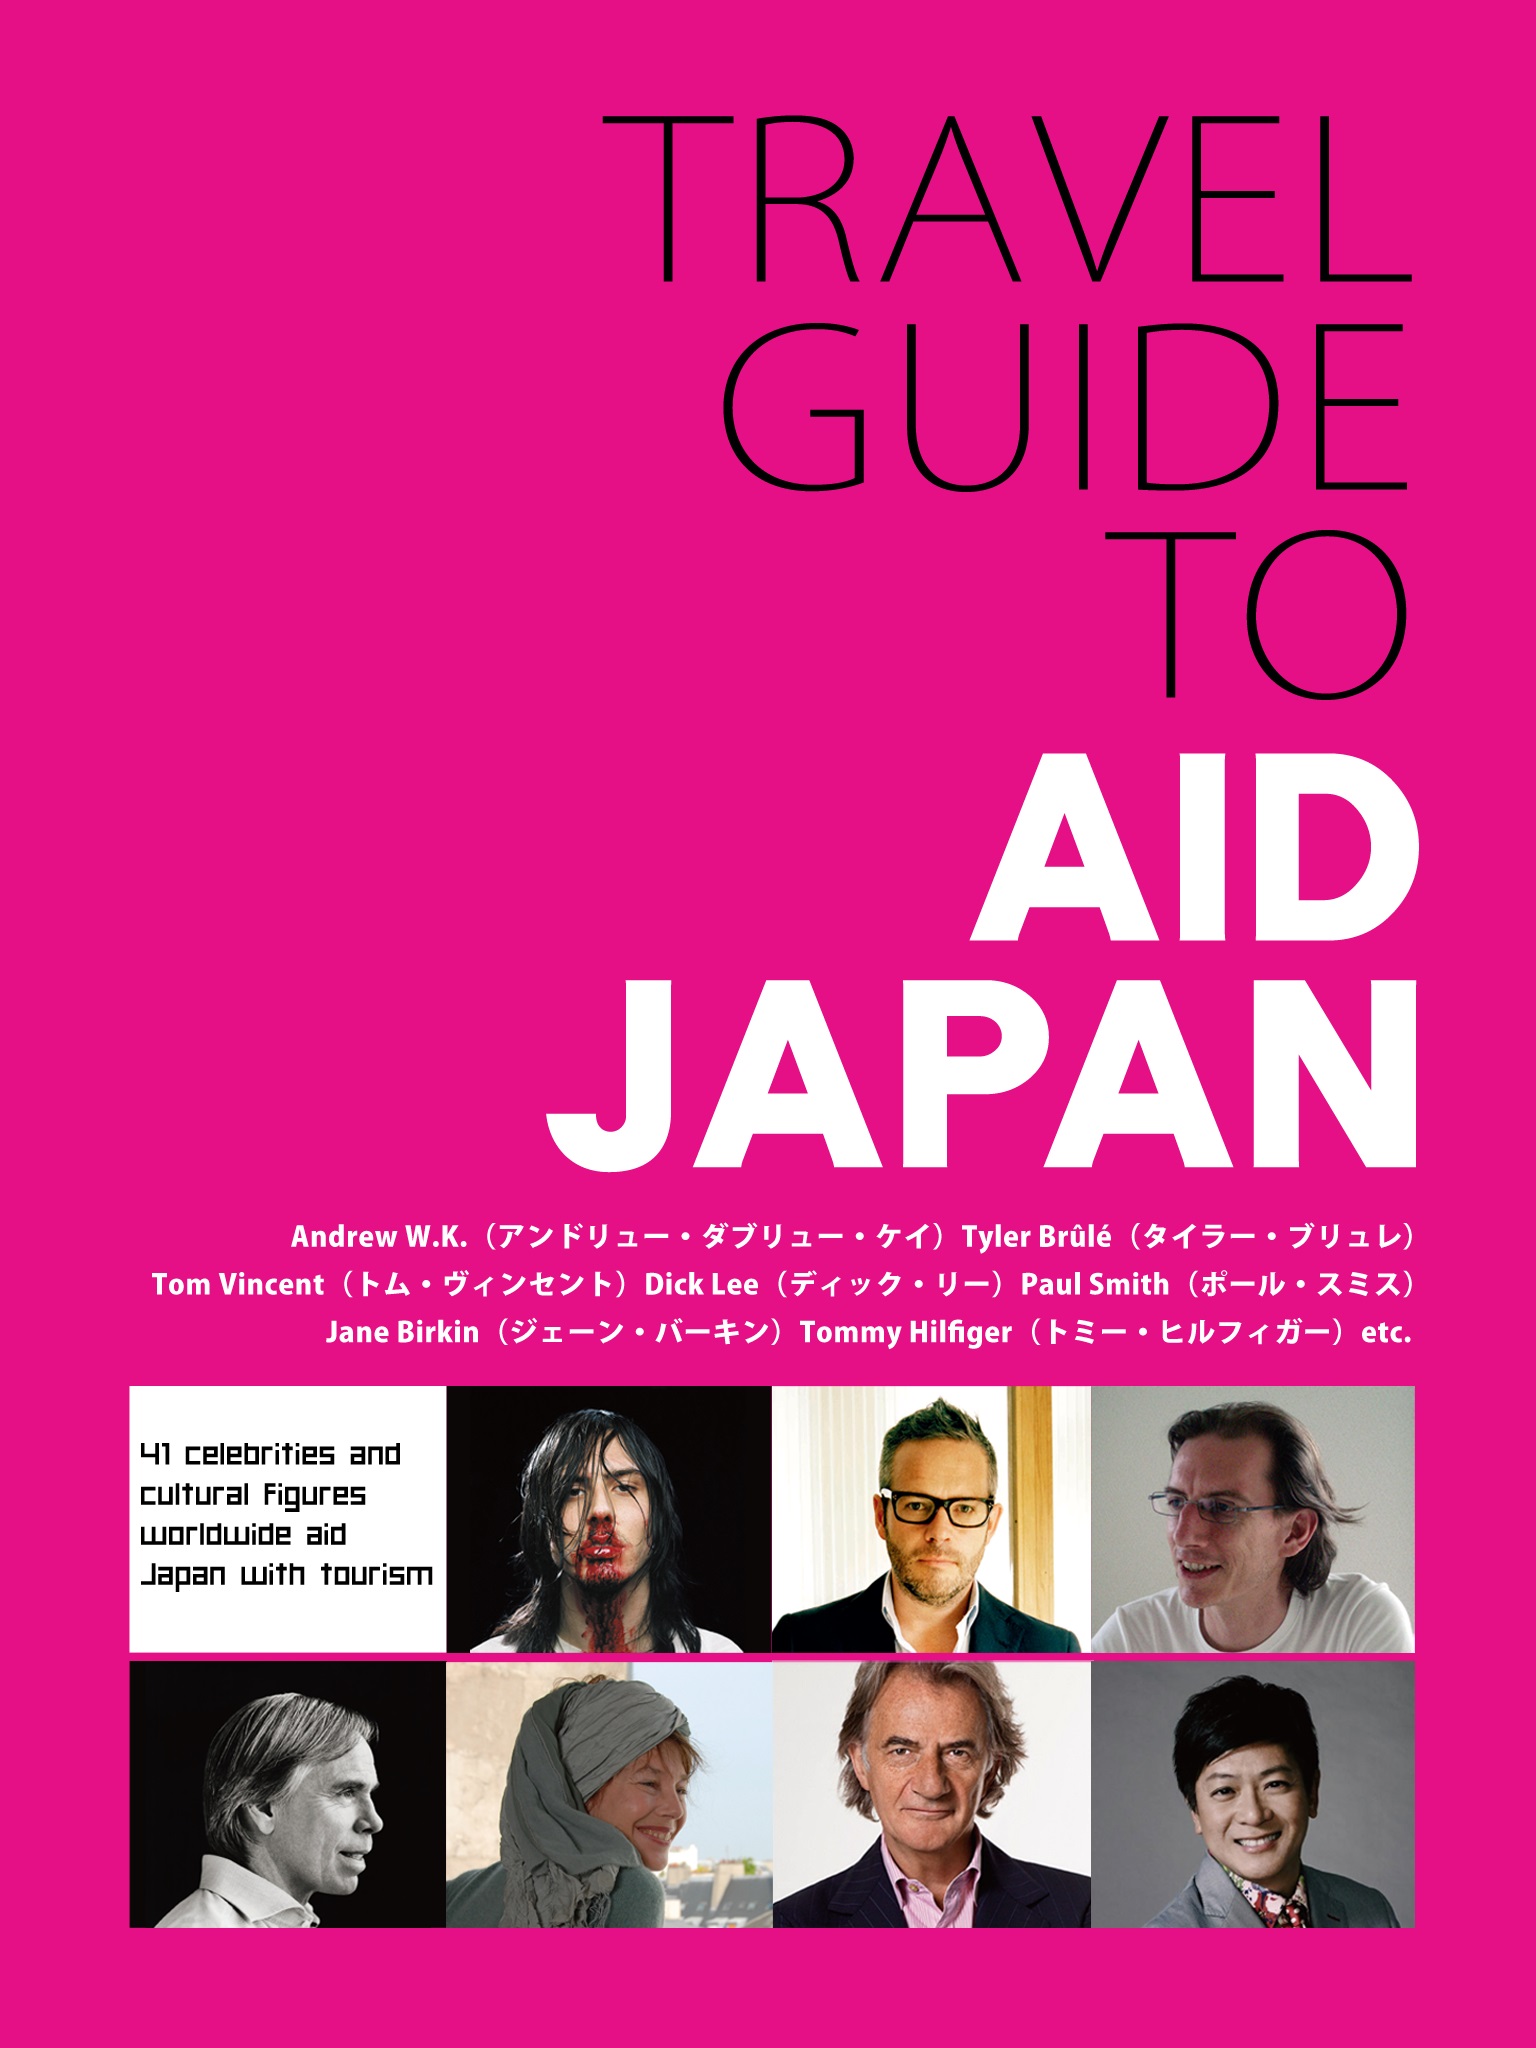 TRAVEL GUIDE TO AID JAPAN